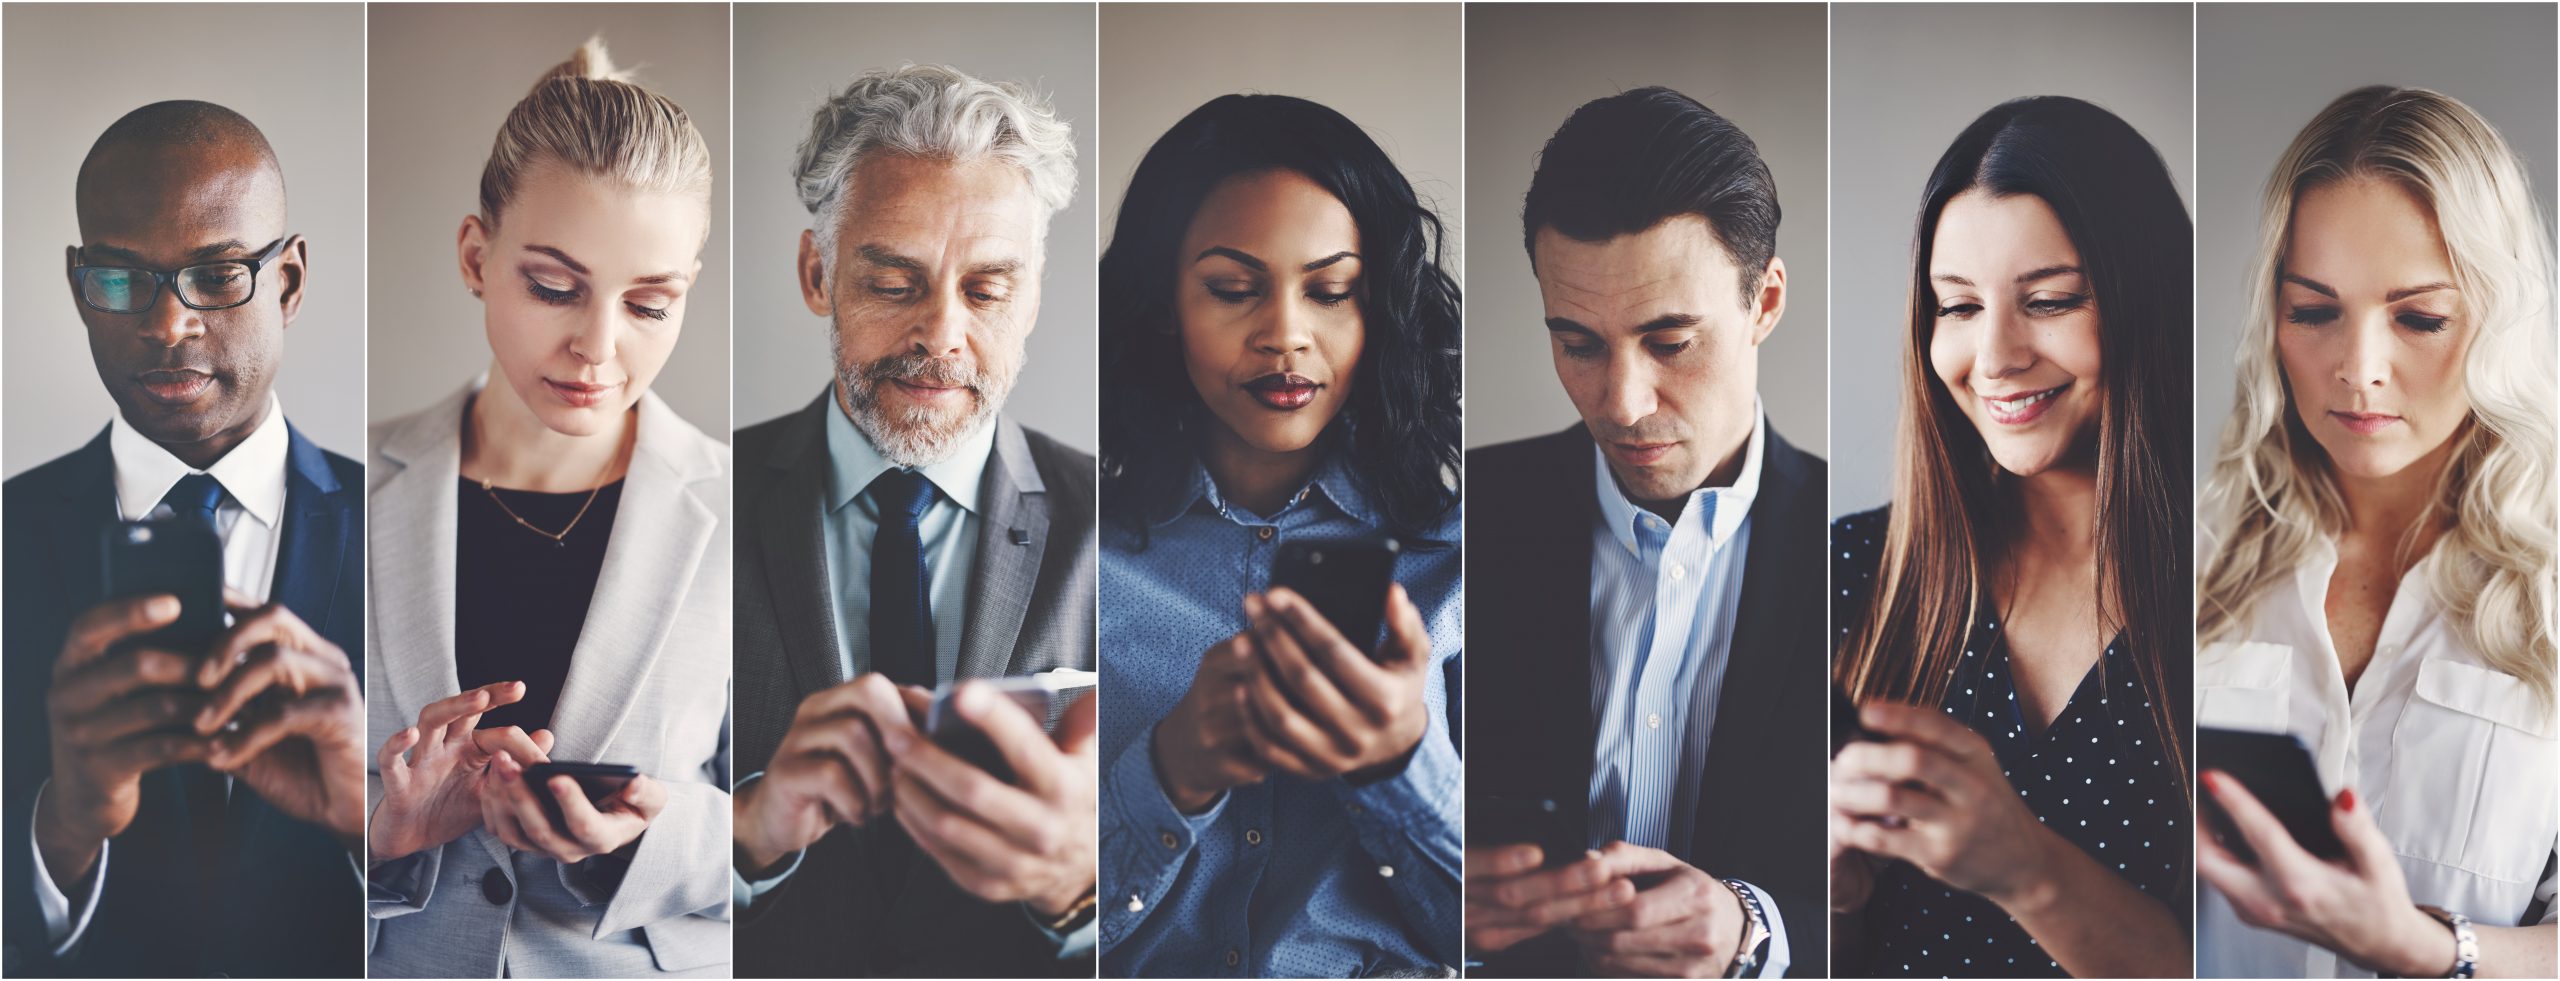 Diverse group of businesspeople reading text messages on cellphones